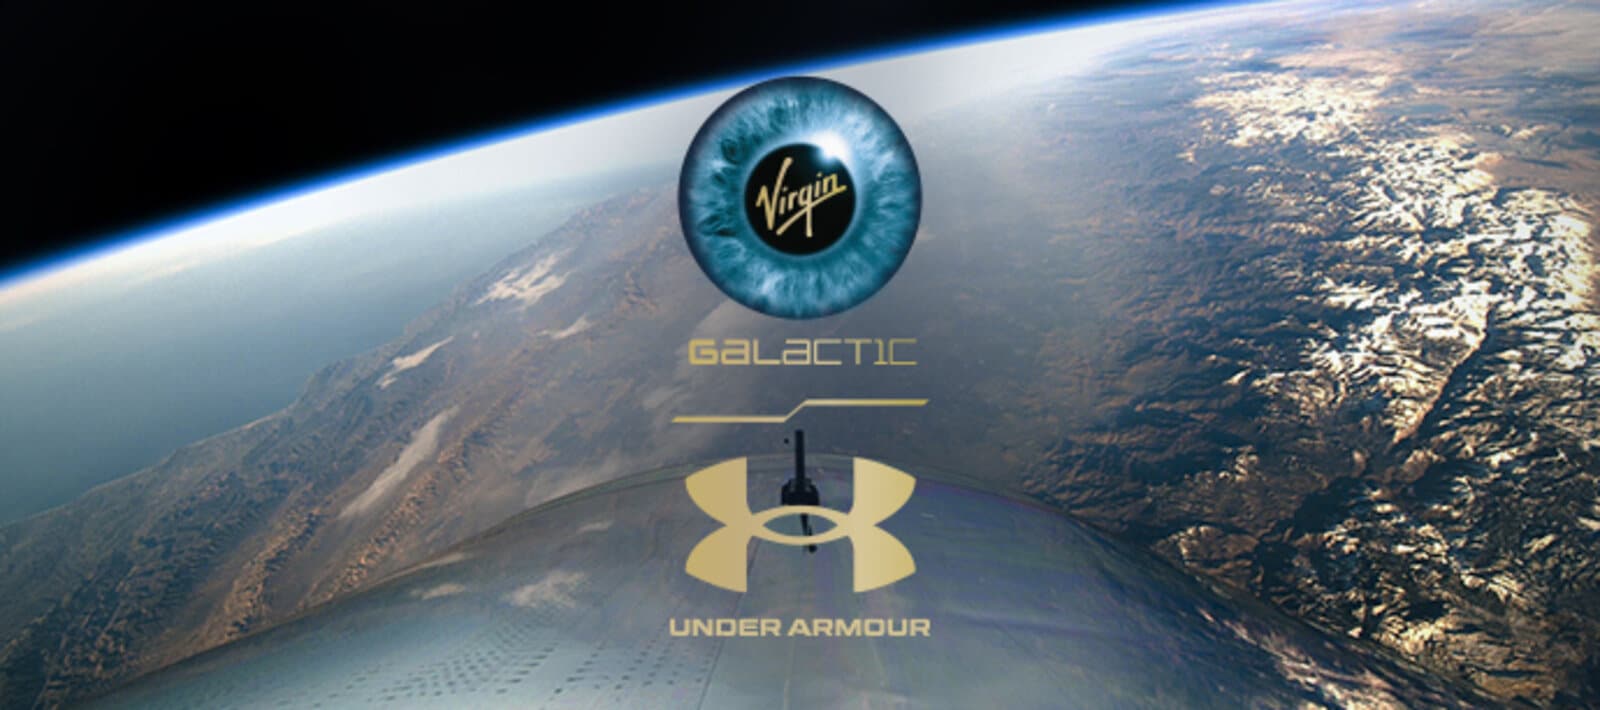 To commemorate the latest virgin galactic spaceflight, under armour releases limited capsule collection